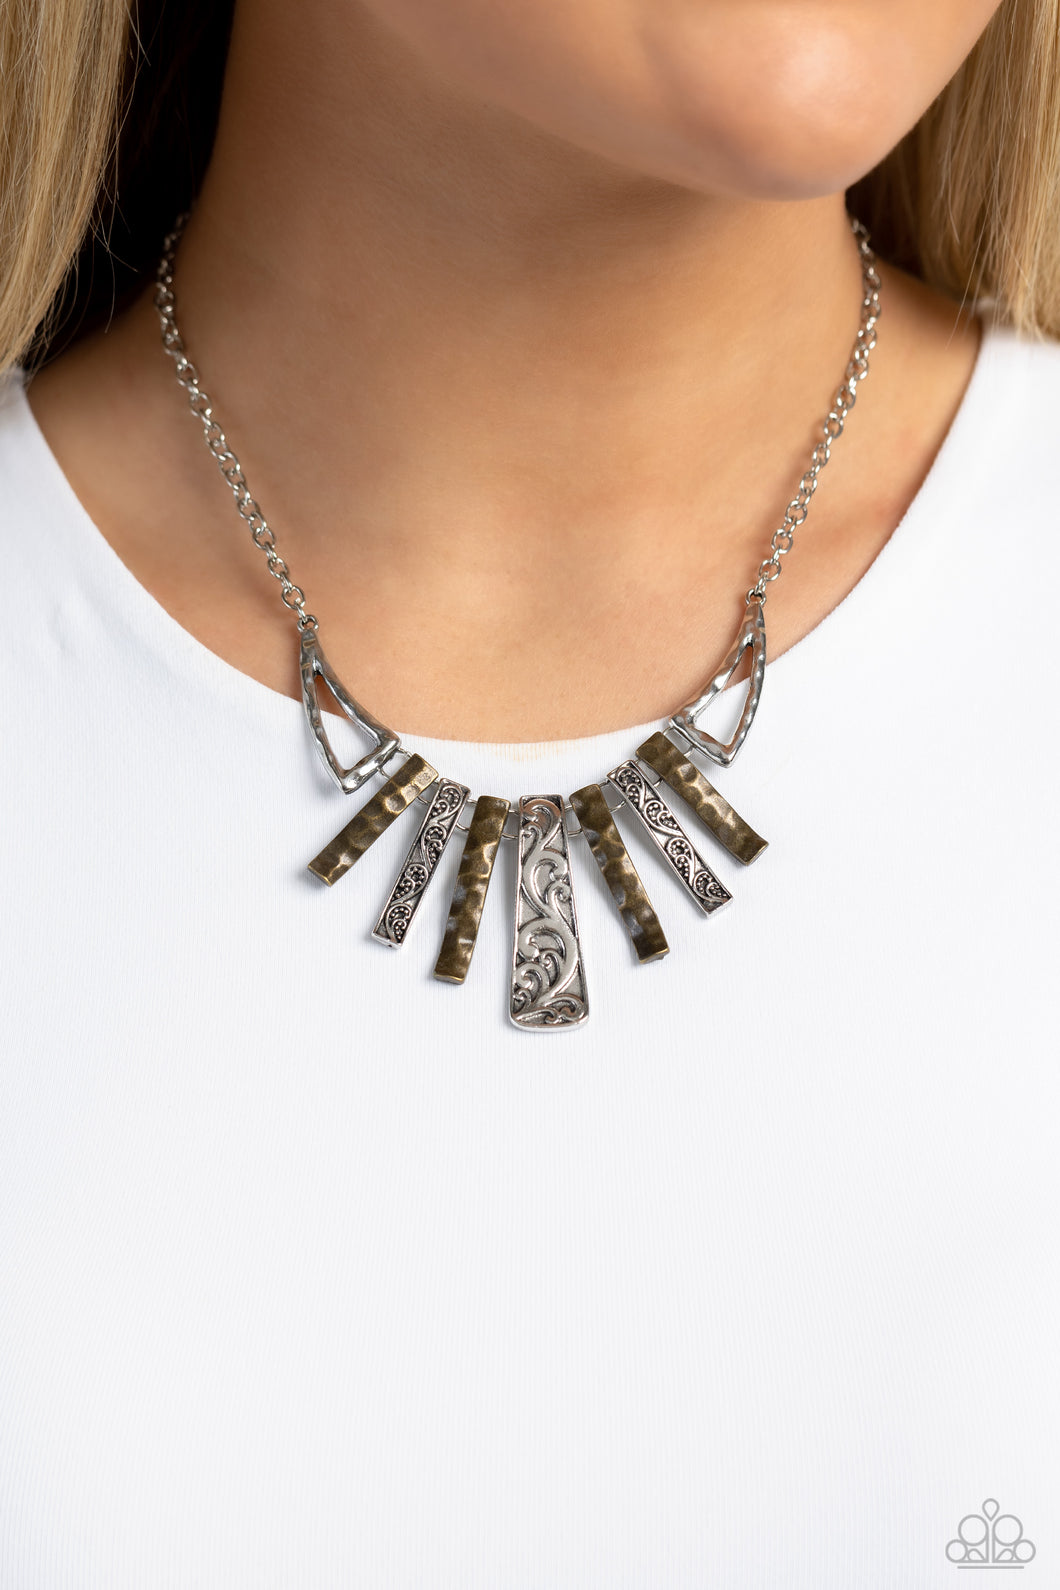 Paisley Pastime - Multi-toned Silver Necklace- Paparazzi Accessories